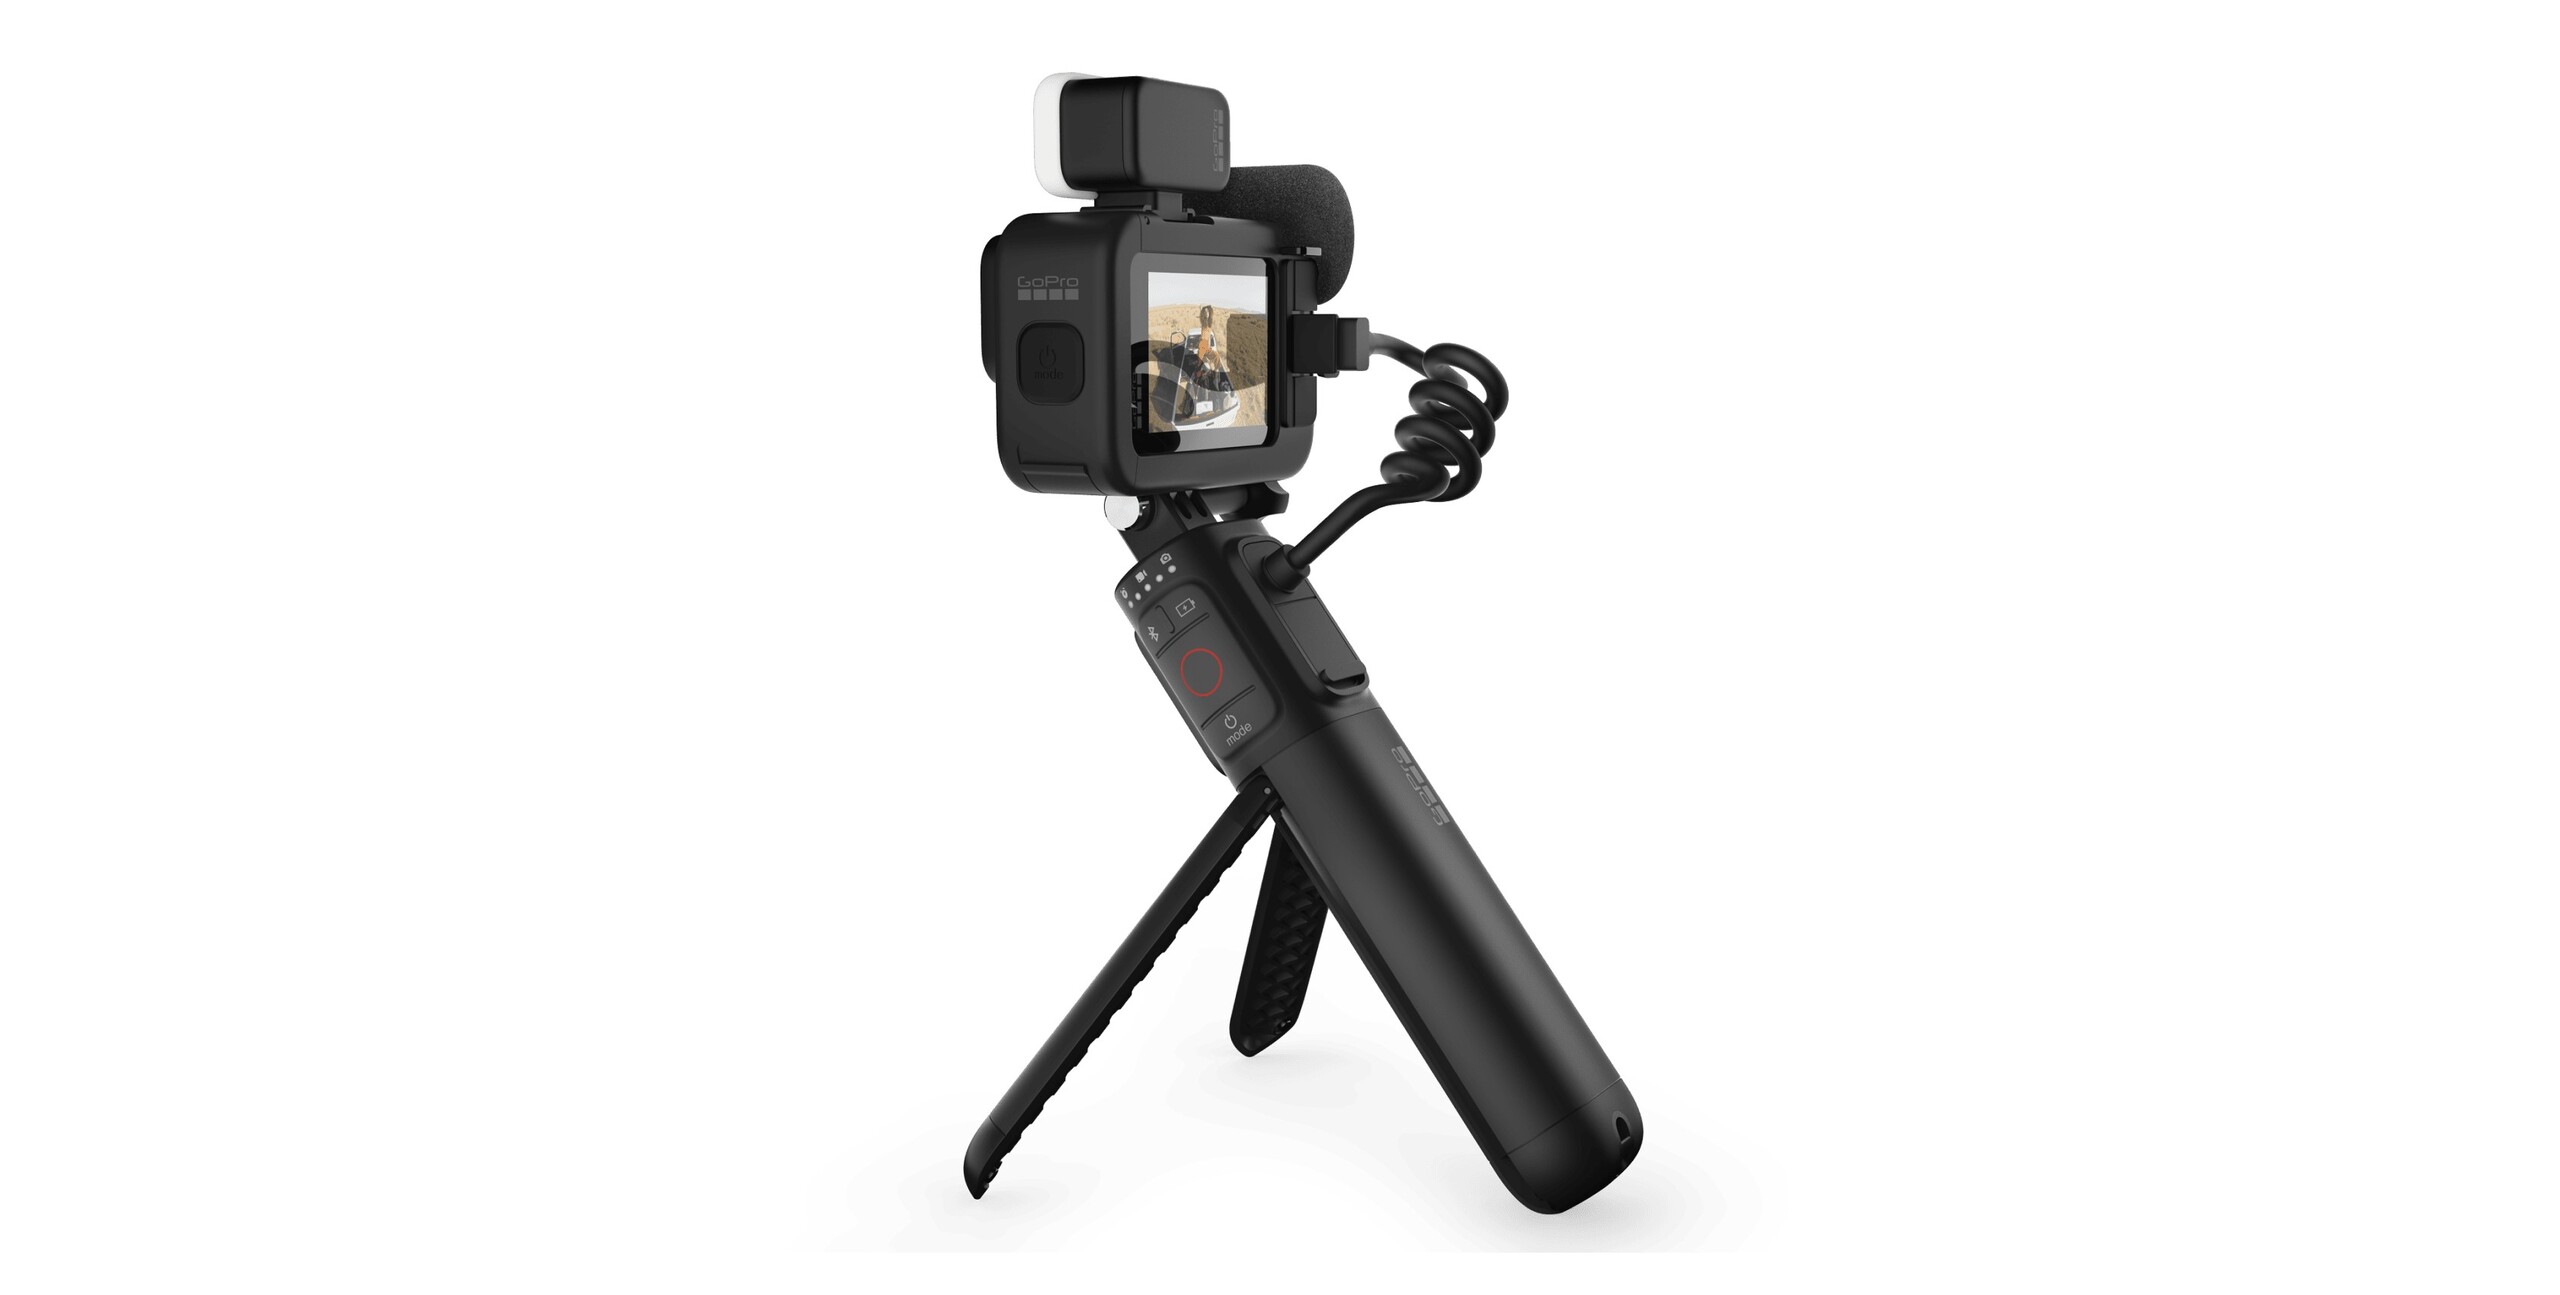 GoPro launches the Volta, a new 2-in-1 battery pack/camera